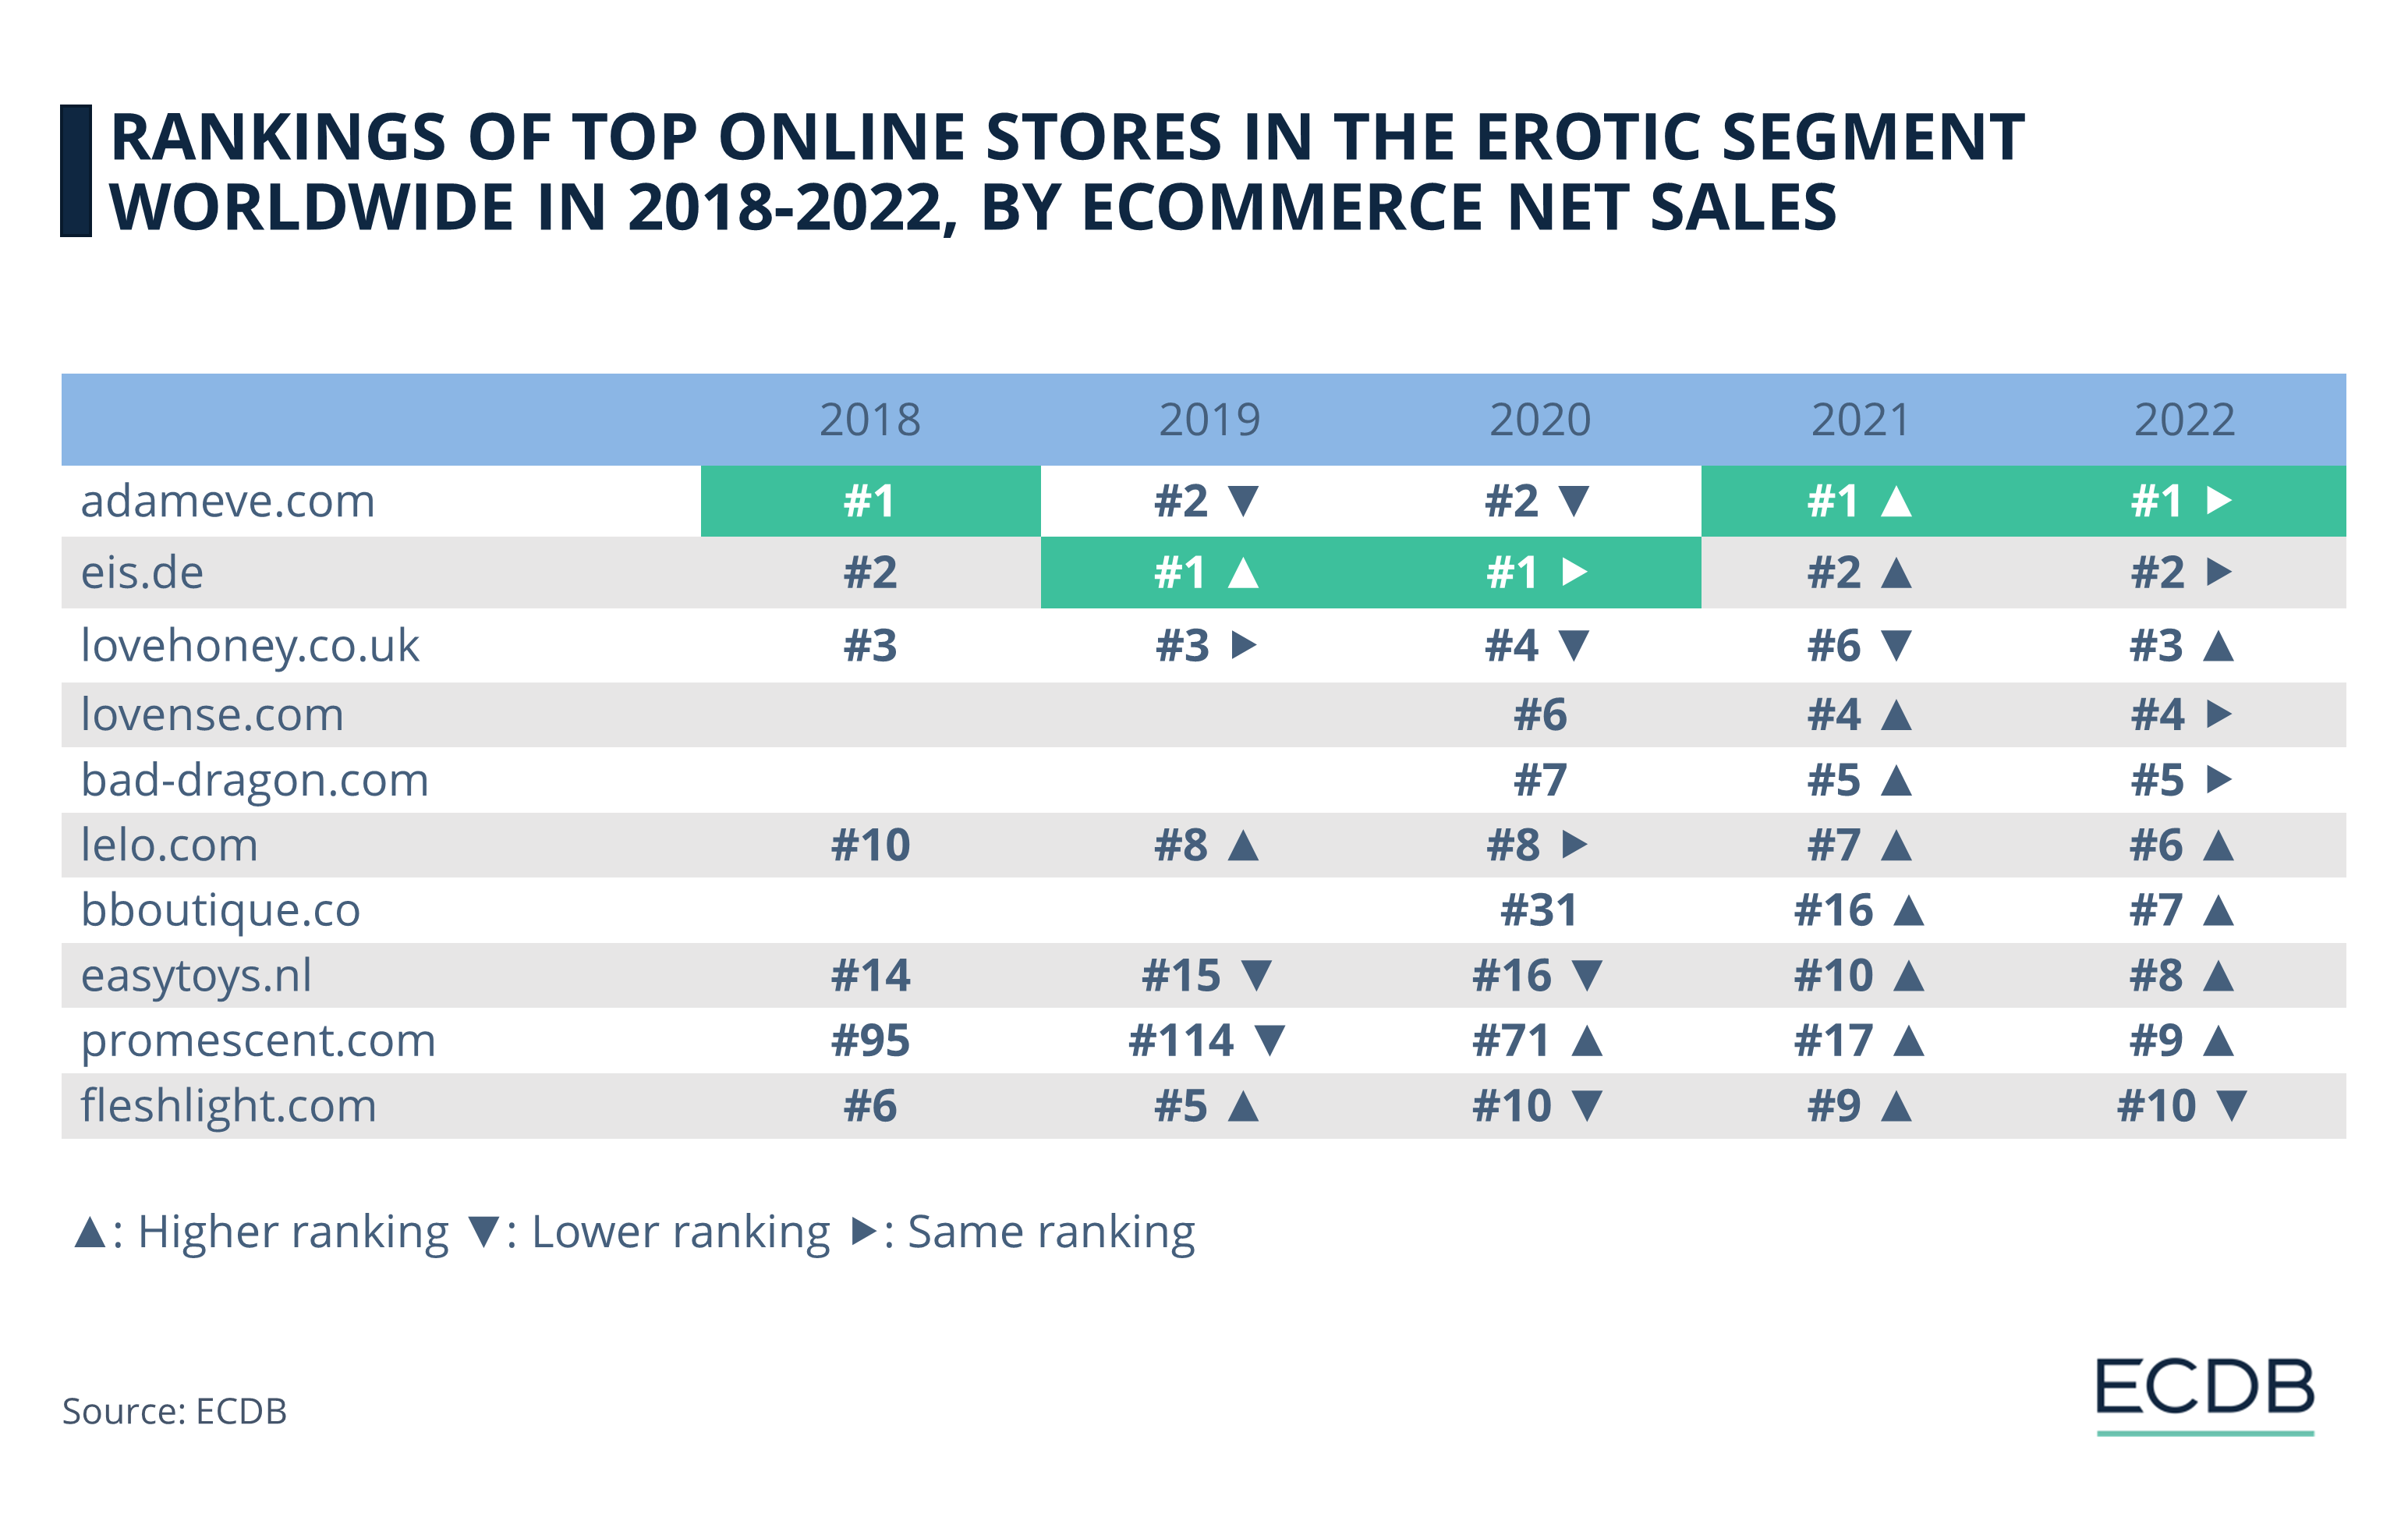 Rankings of Top Online Stores in the Erotic Segment Worldwide in 2018-2022, by eCommerce Net Sales